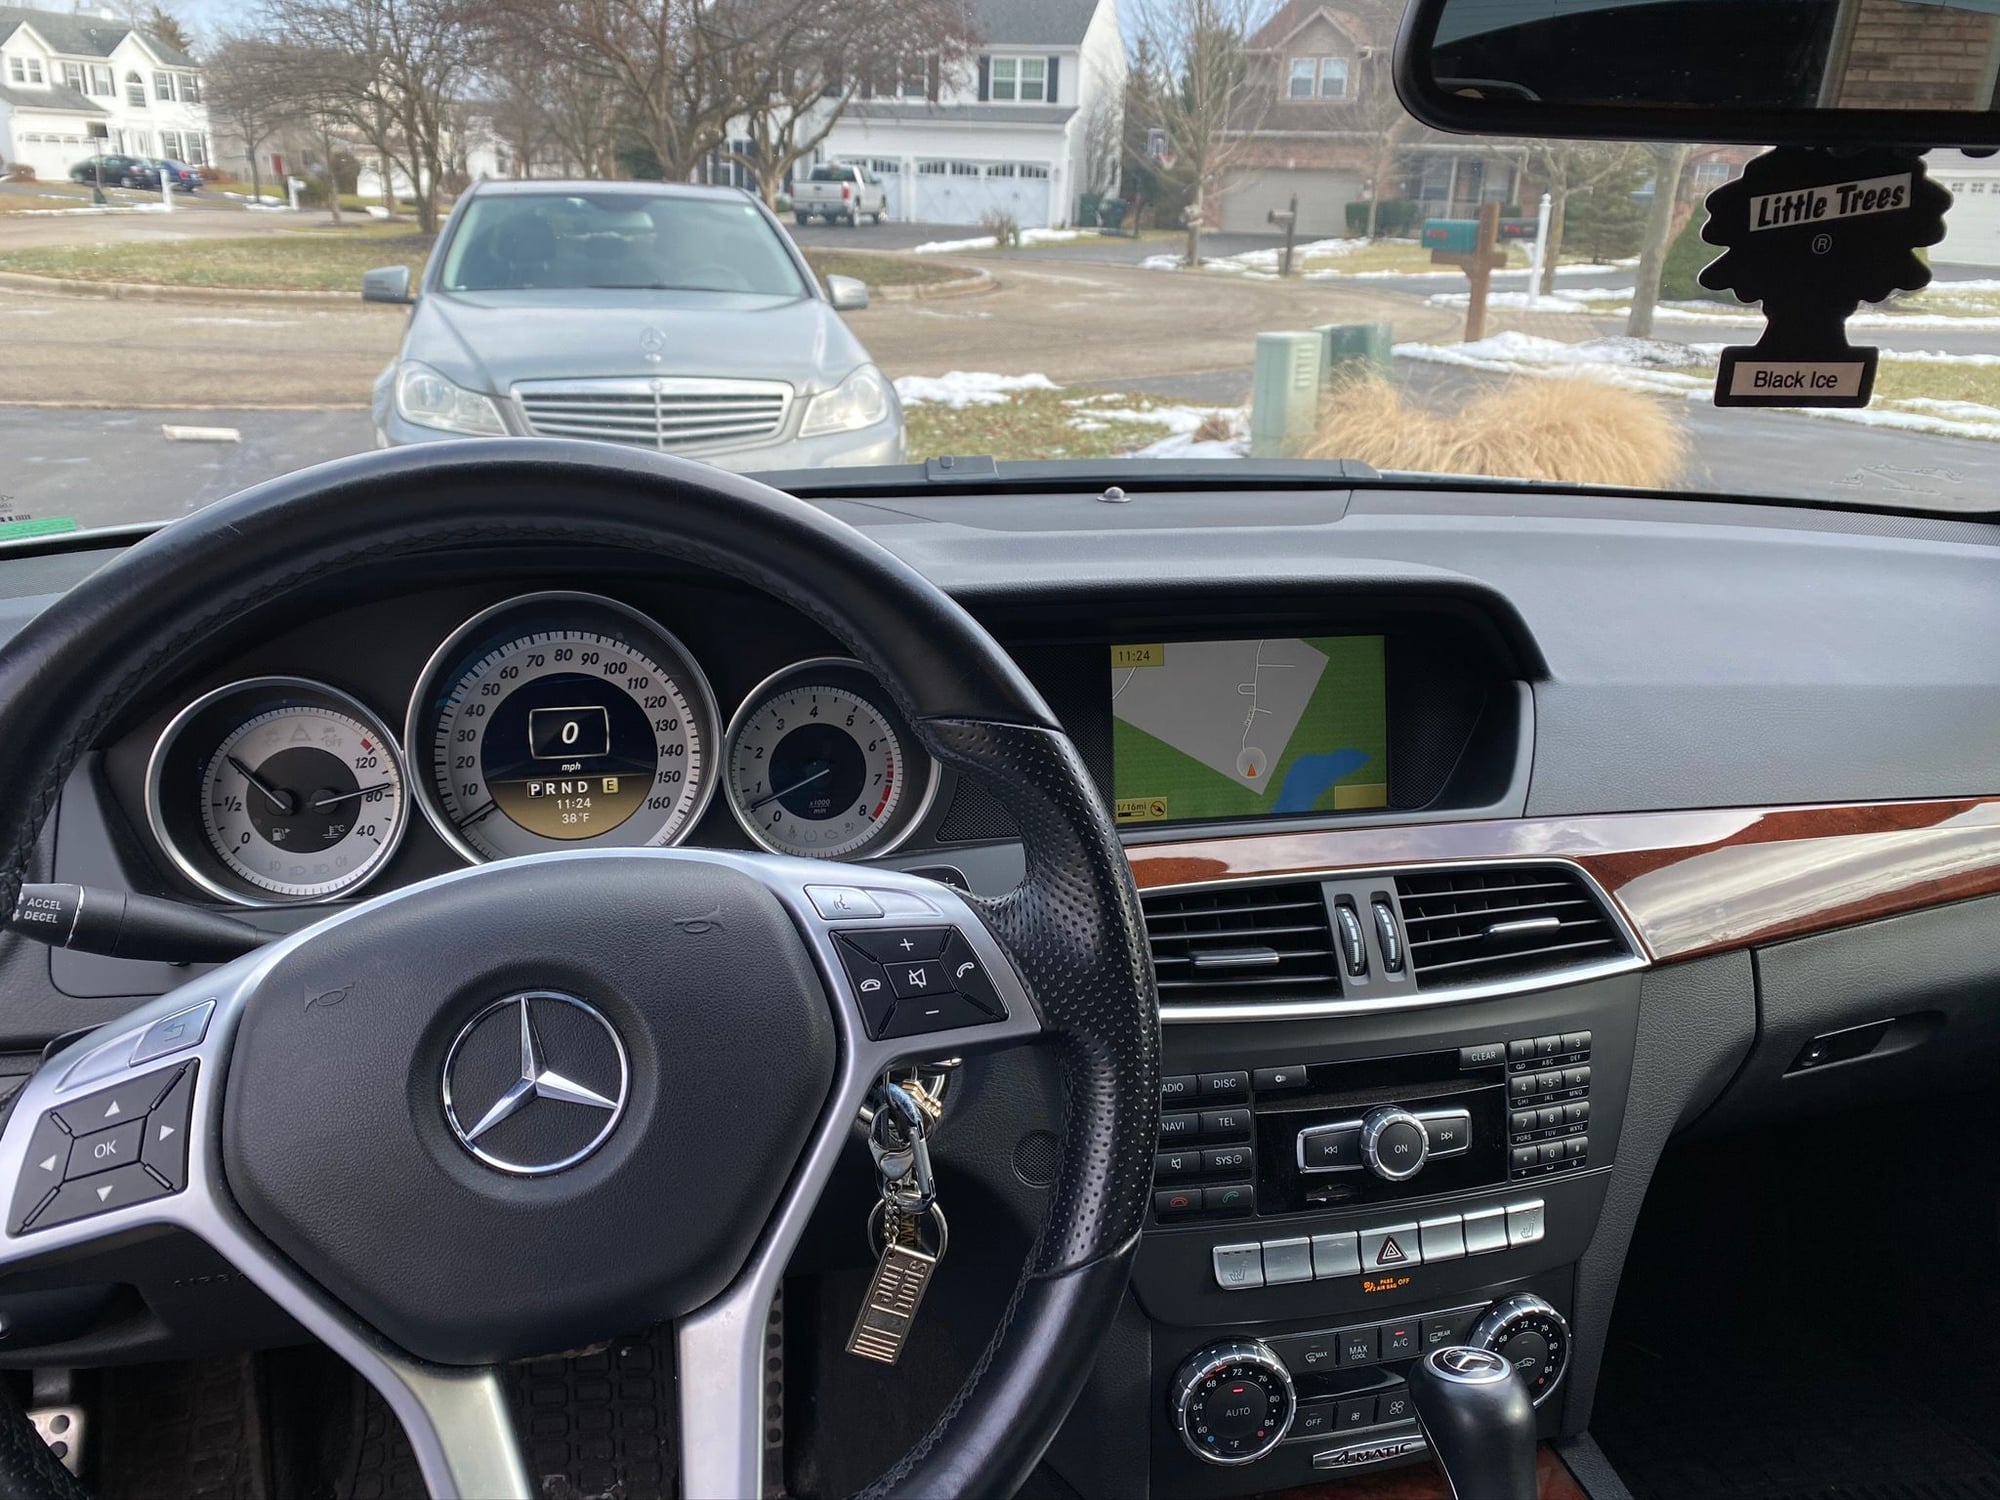 2012 Mercedes-Benz C350 - Low mileage 2012 c350 (blue efficiency) 4matic - Used - VIN WDDGJ8JB1CF907633 - 68,000 Miles - 6 cyl - AWD - Automatic - Coupe - Silver - Lindenhurst, IL 60046, United States